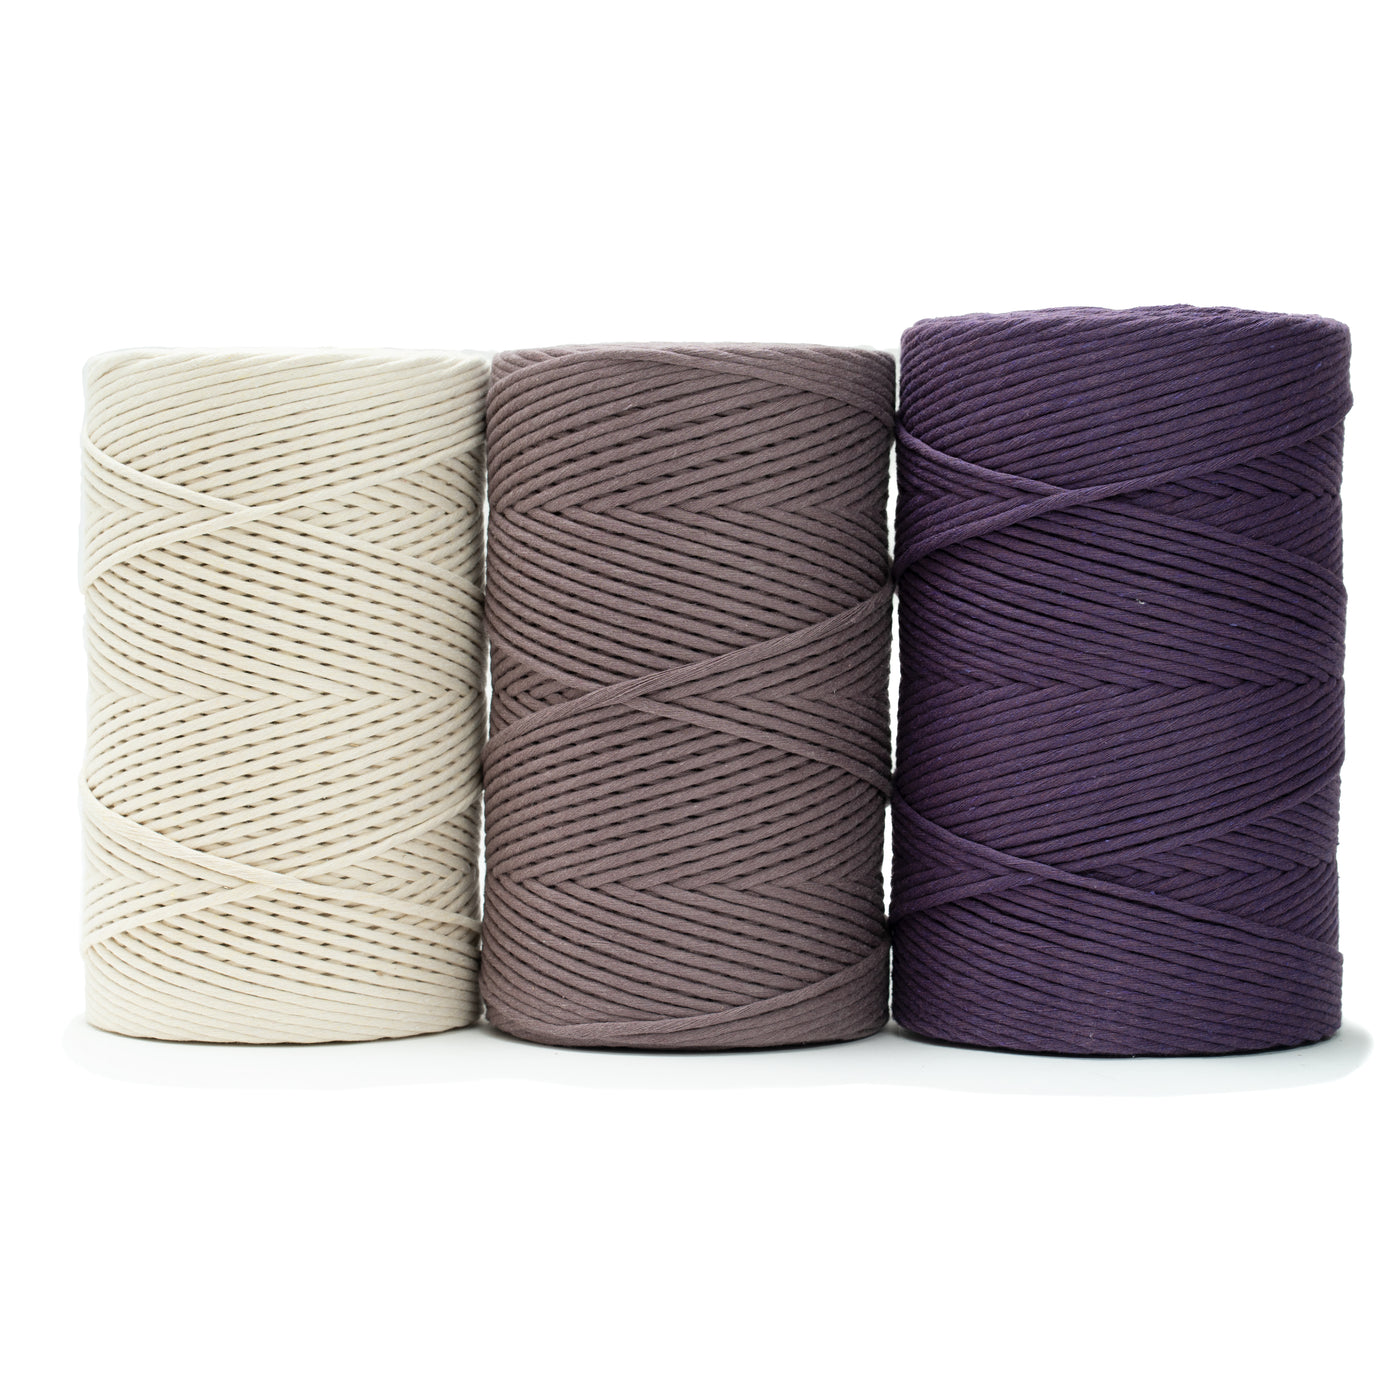 Curated Bundle - Off White, Dusty Lavender & Damson